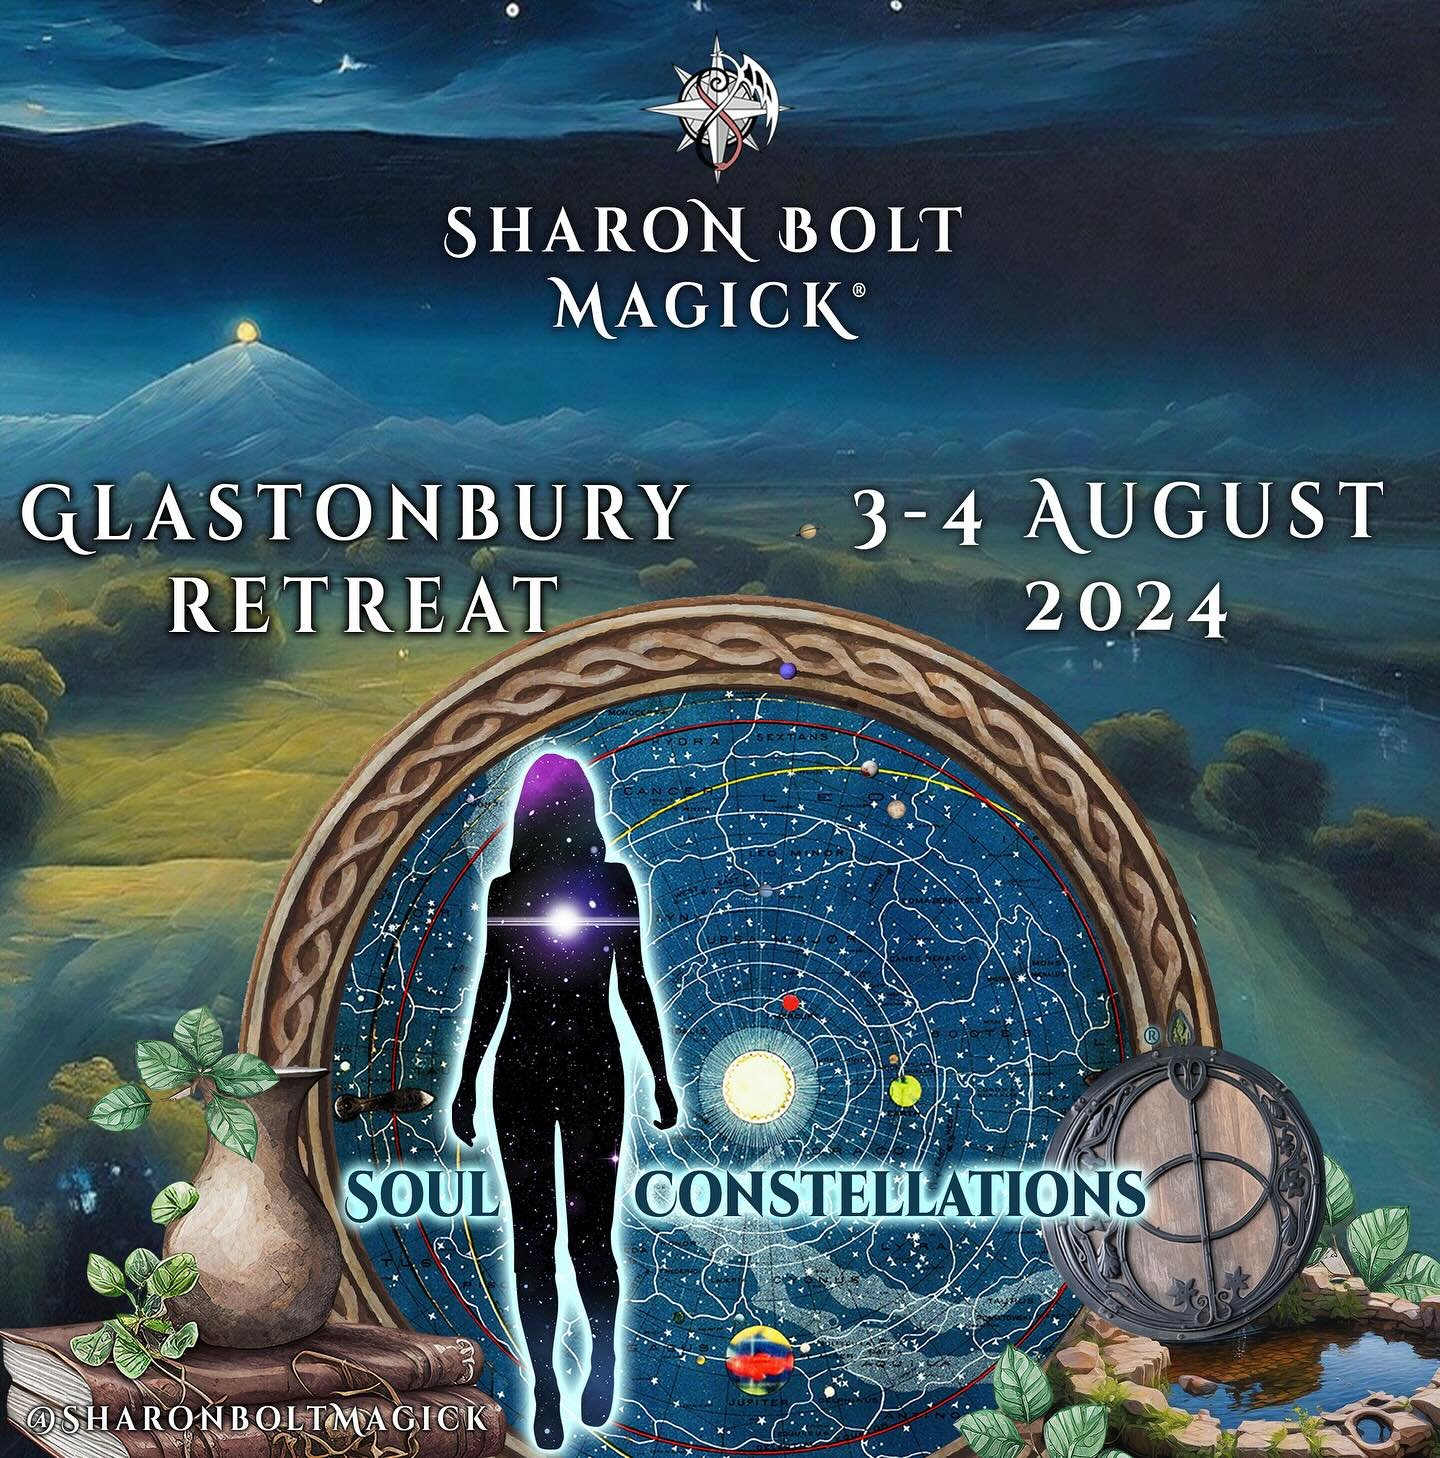 &ldquo;Soul on Fire&rdquo; &ndash; Soul Constellations&reg; Weekend Retreat 

Glastonbury 3-4th August, 2024

What if you could finally get clear on your Soul&rsquo;s purpose in this lifetime? 

Every soul has a different journey on this planet, but 